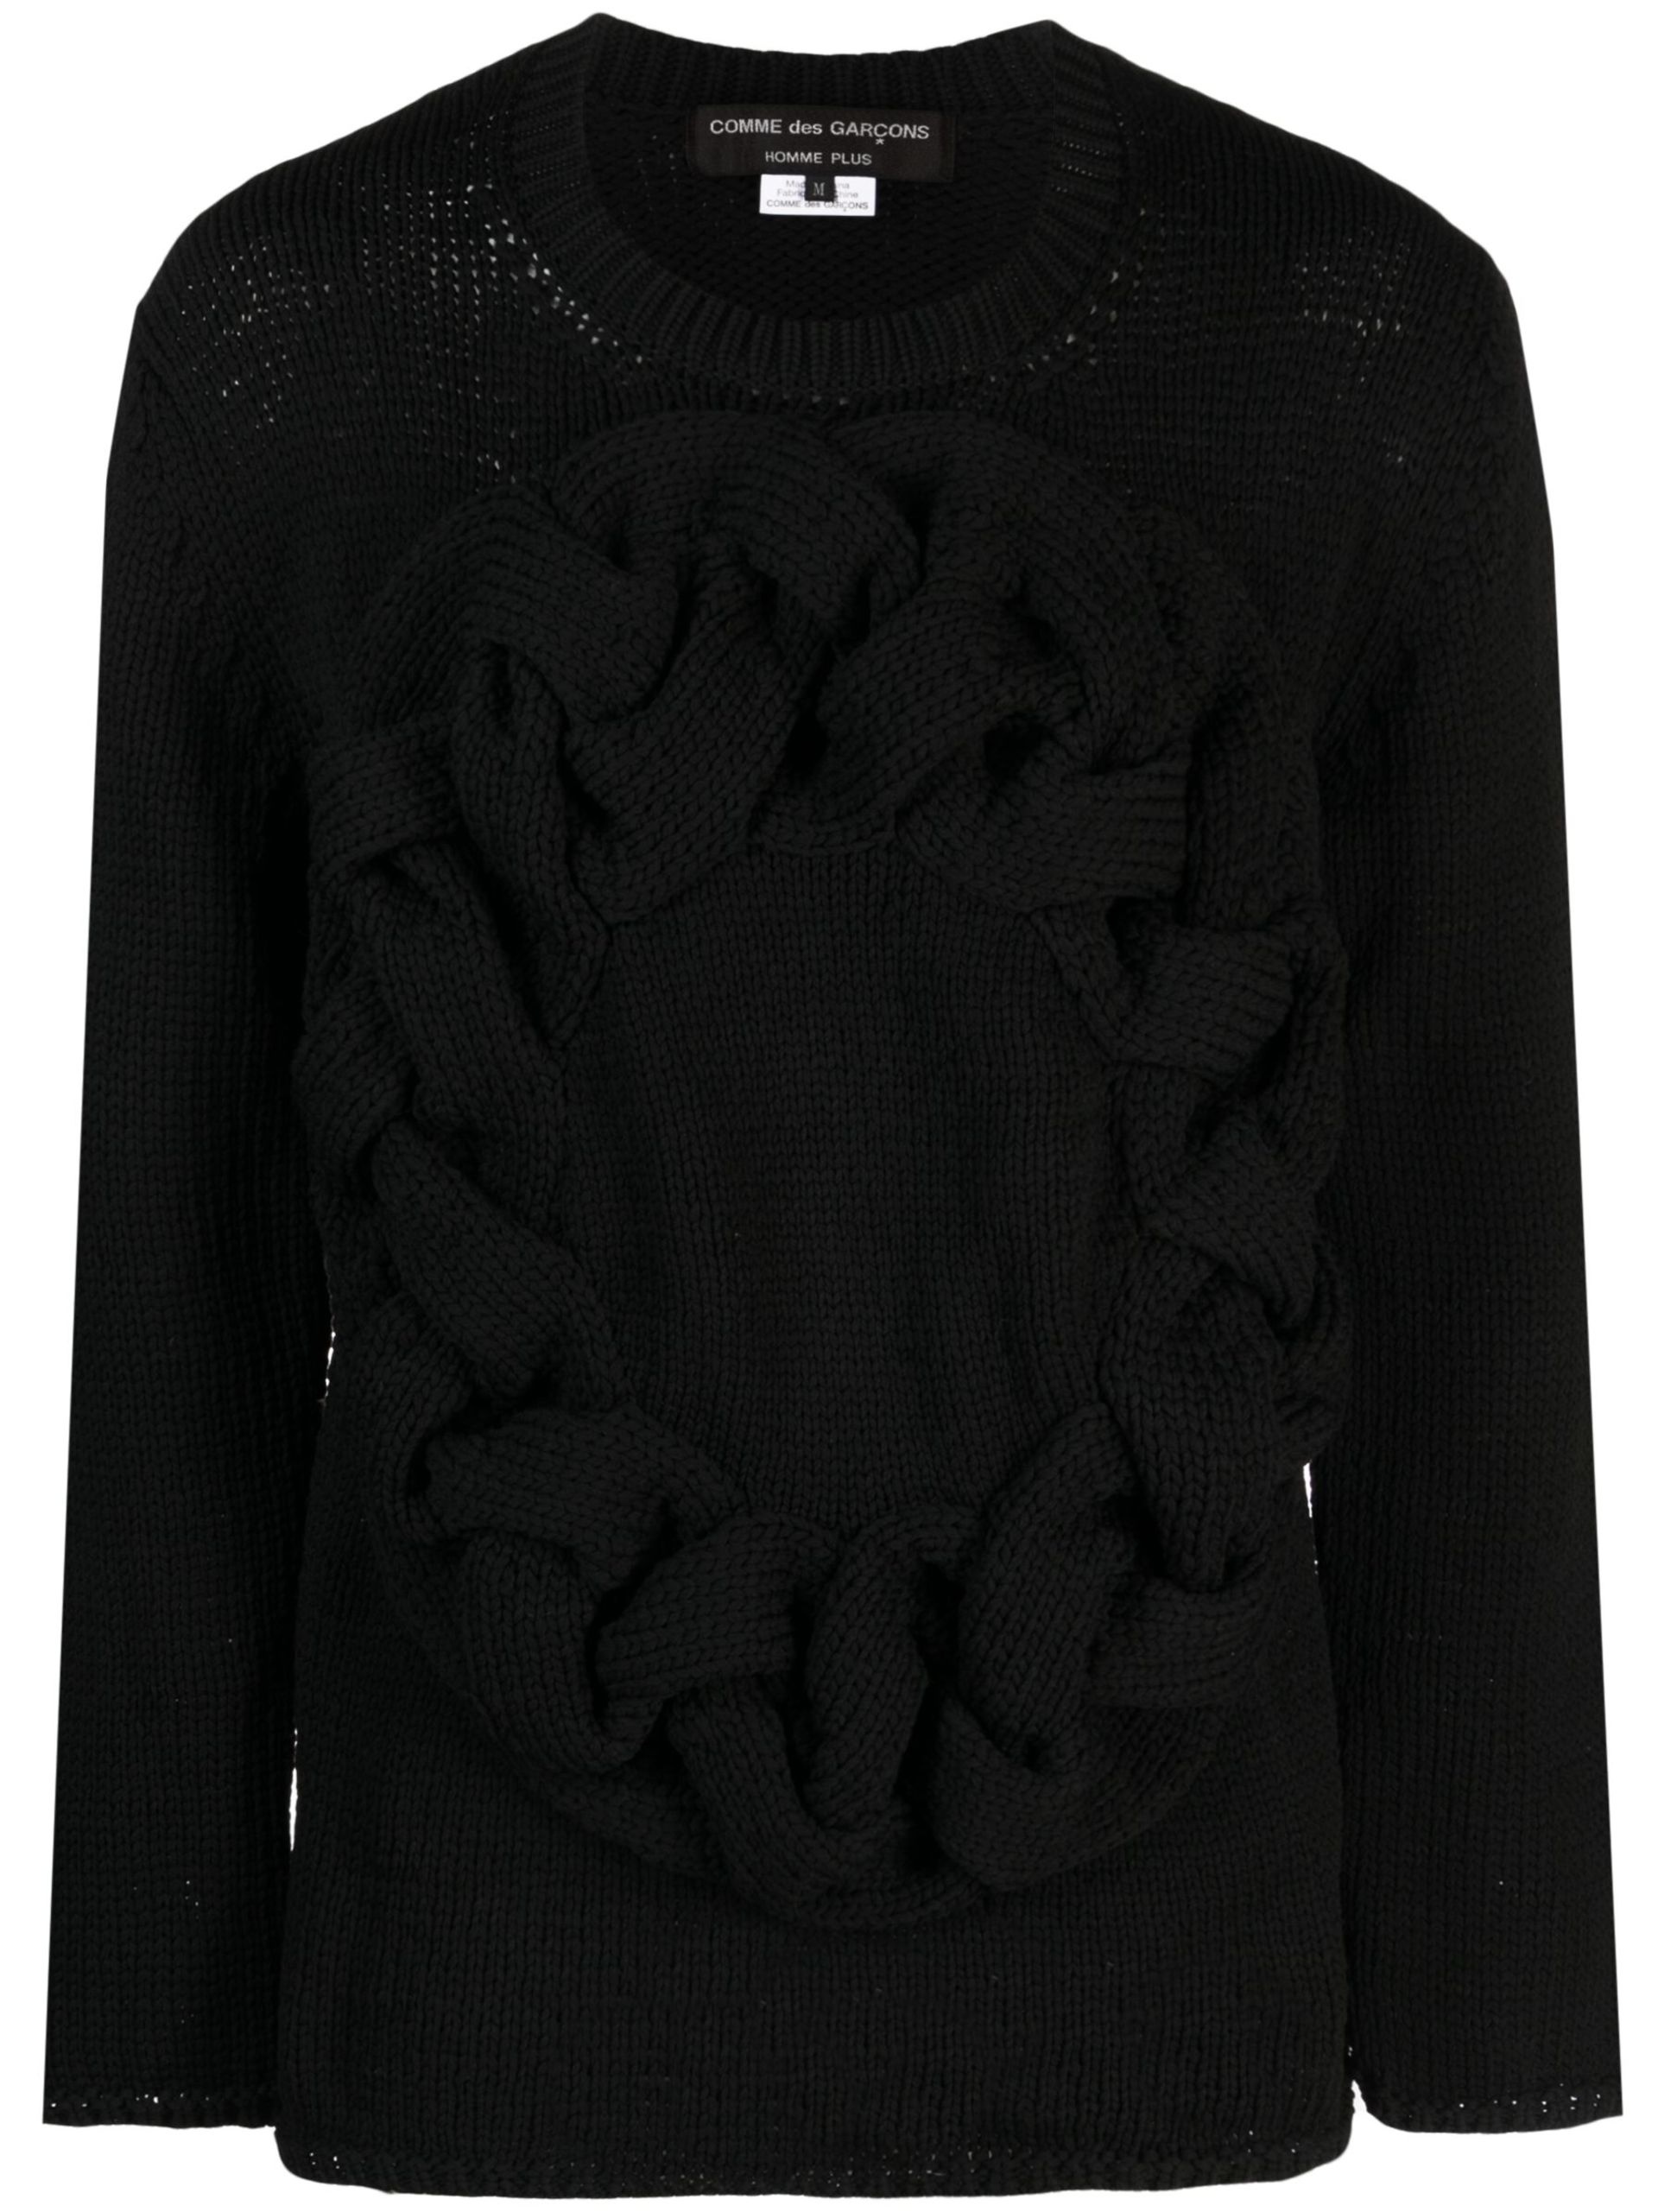 Black Cable-Knit Crew-Neck Sweater - 1